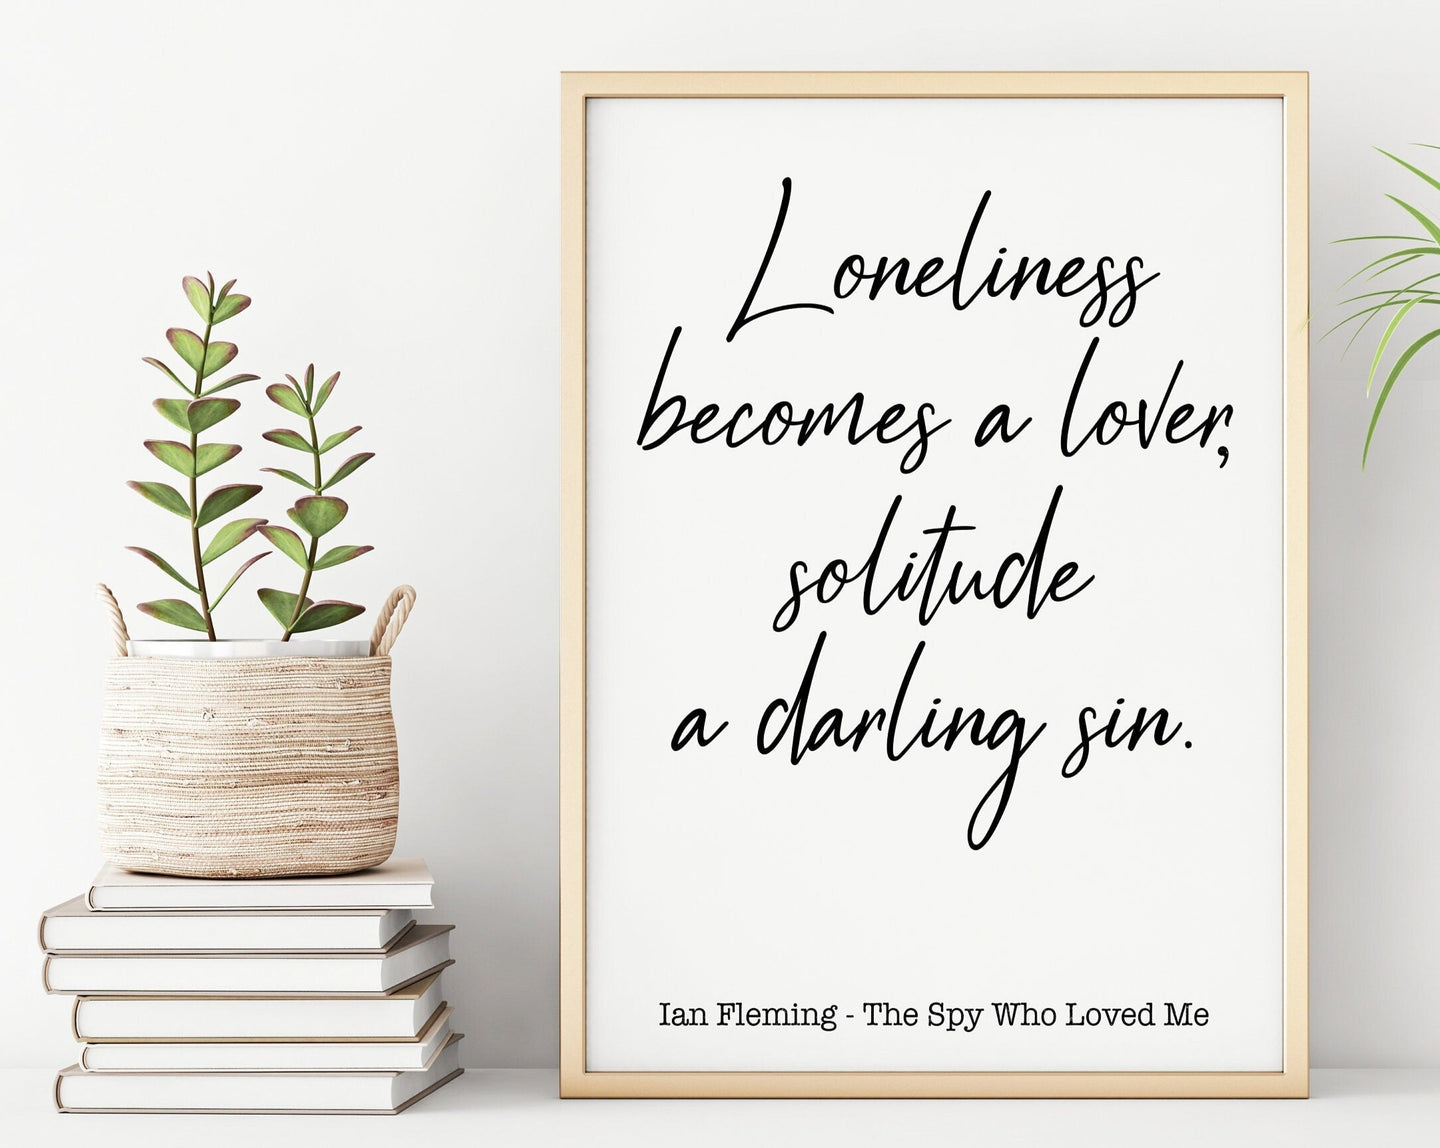 James Bond - Ian Fleming book quote - The Spy Who Loved Me - Loneliness becomes a lover, solitude a darling sin - Print for wall decor